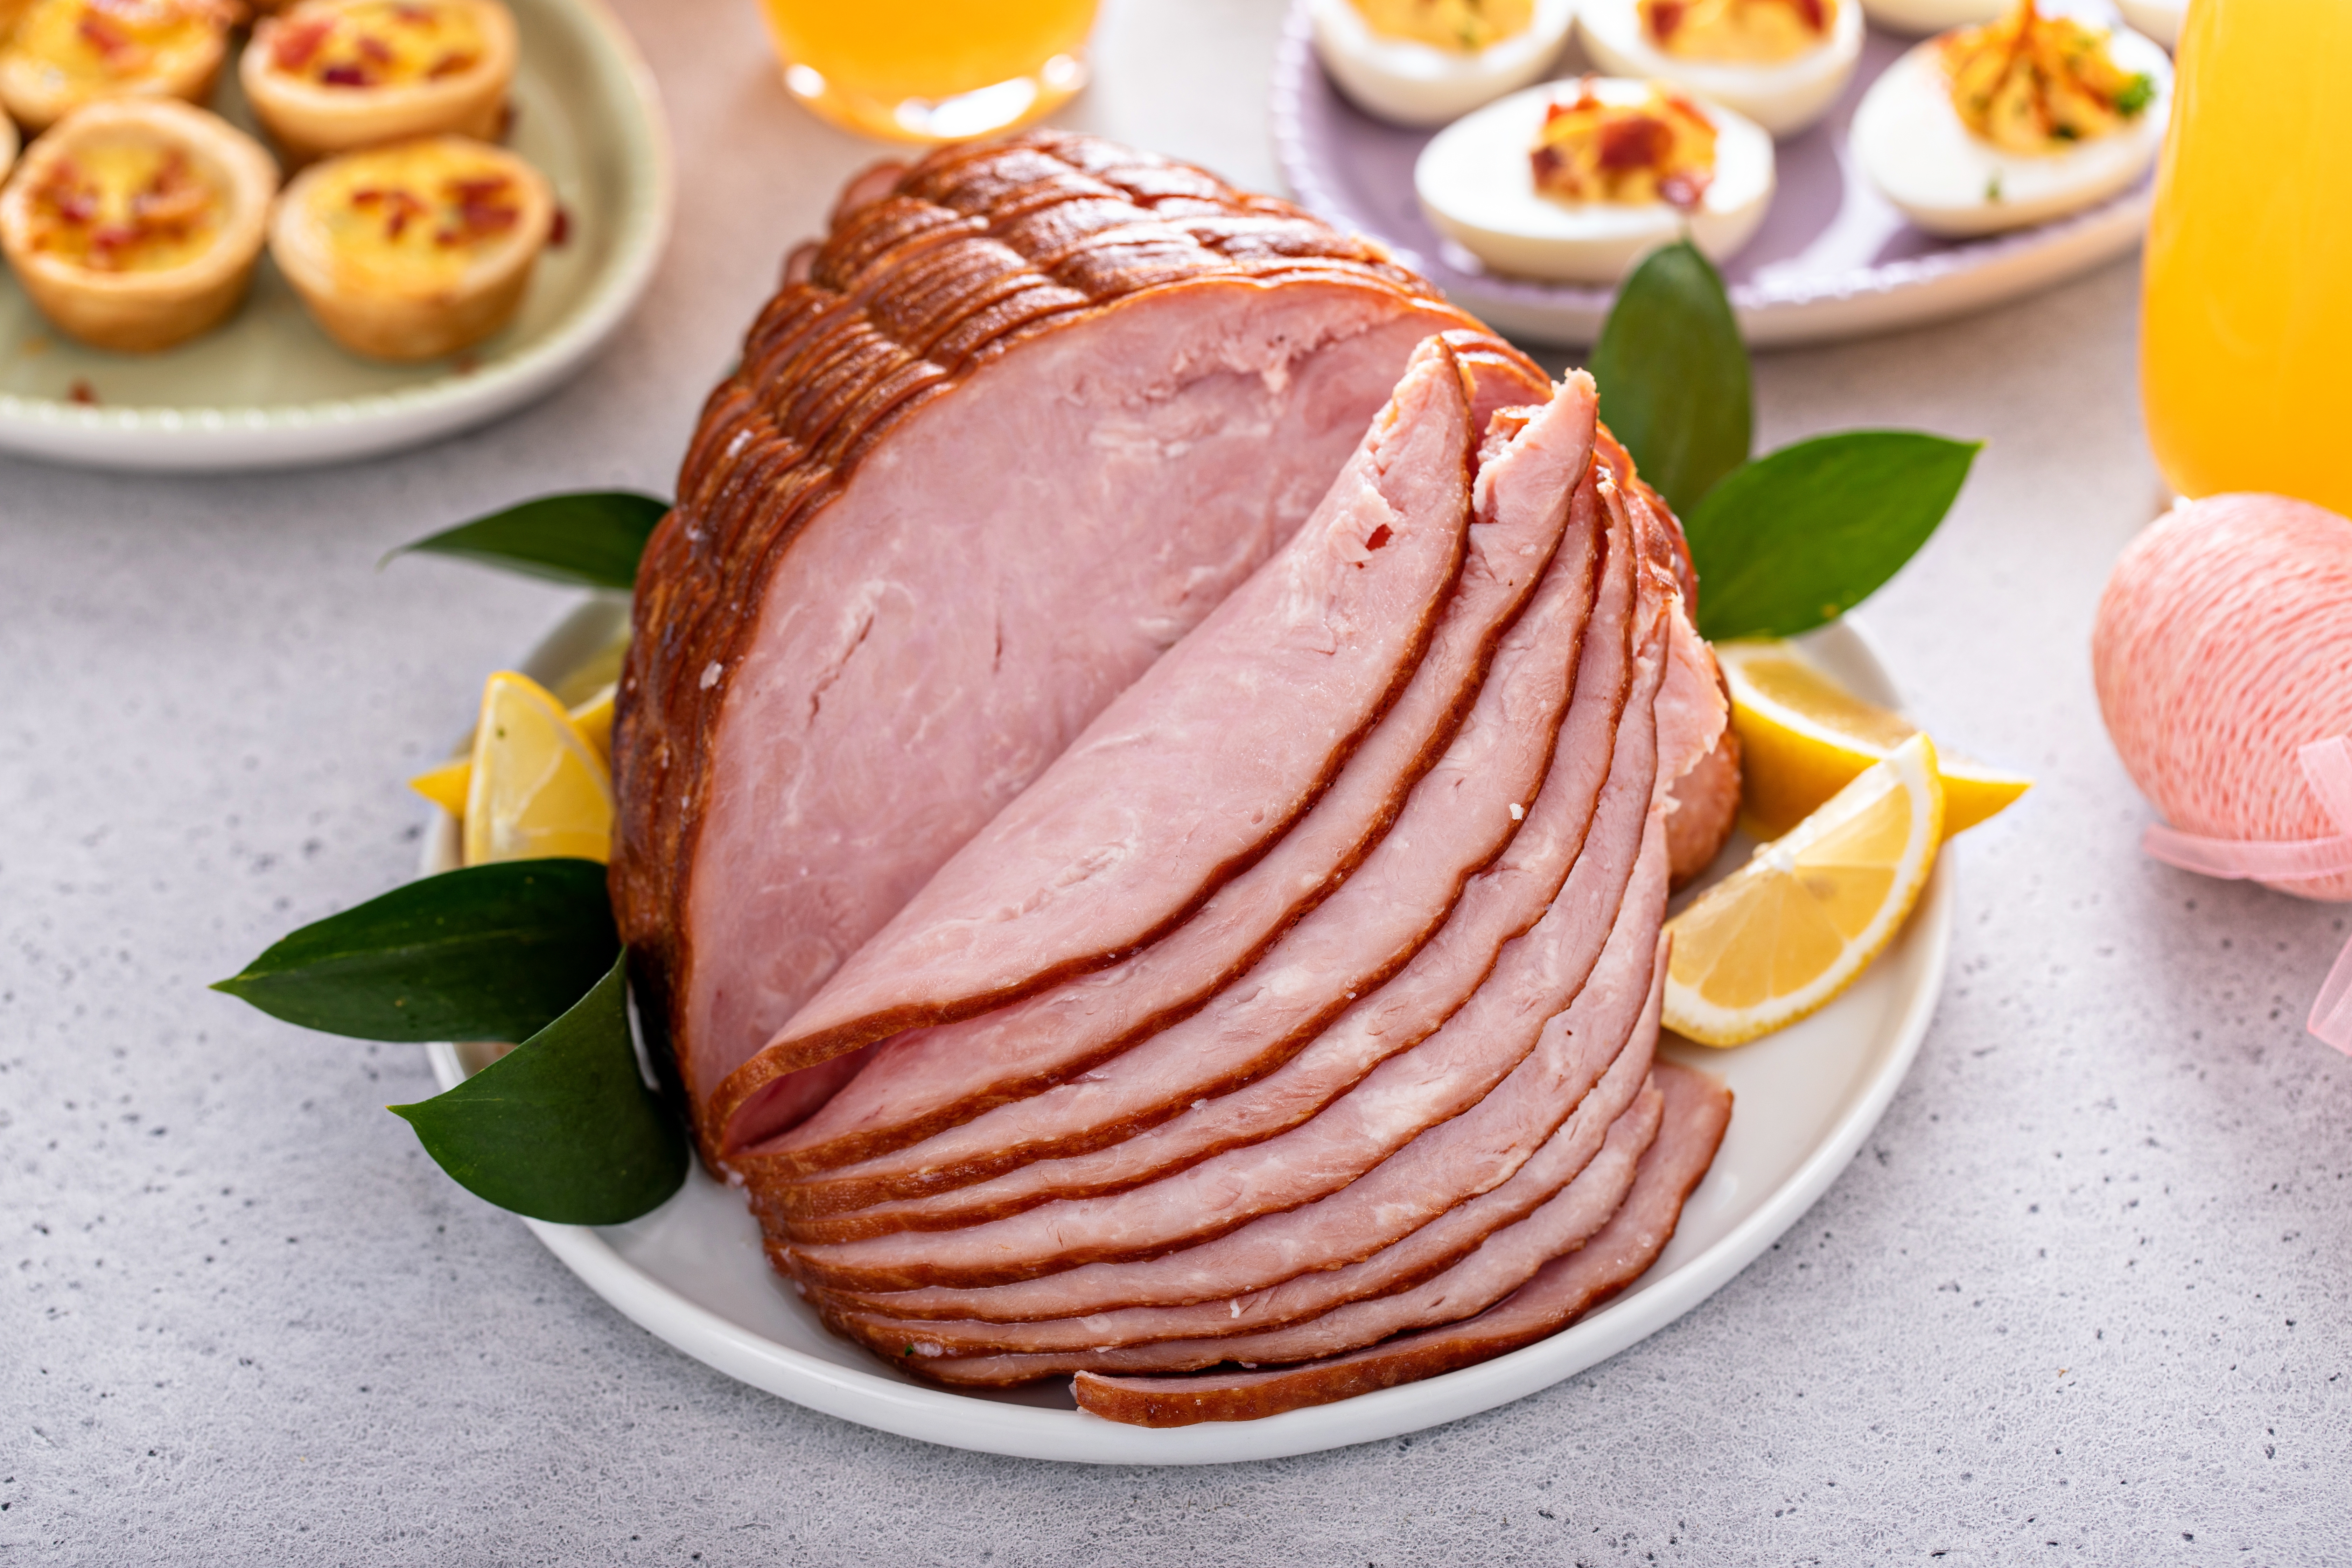 Easter ham on the table | Source: Shutterstock